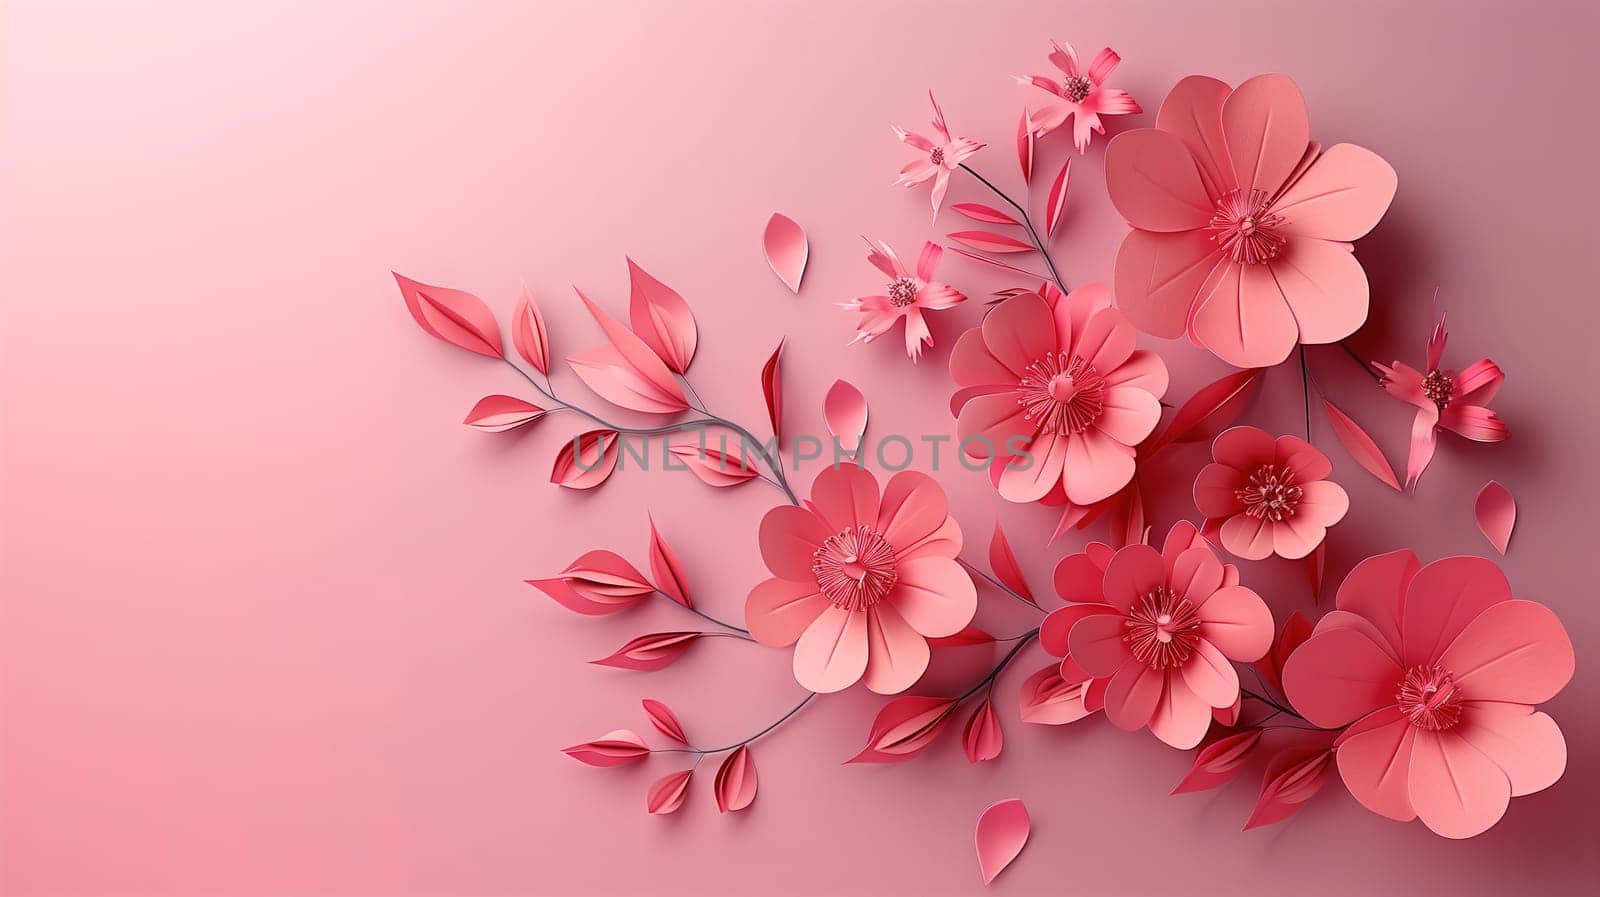 Paper Flowers on a Pink Background by TRMK